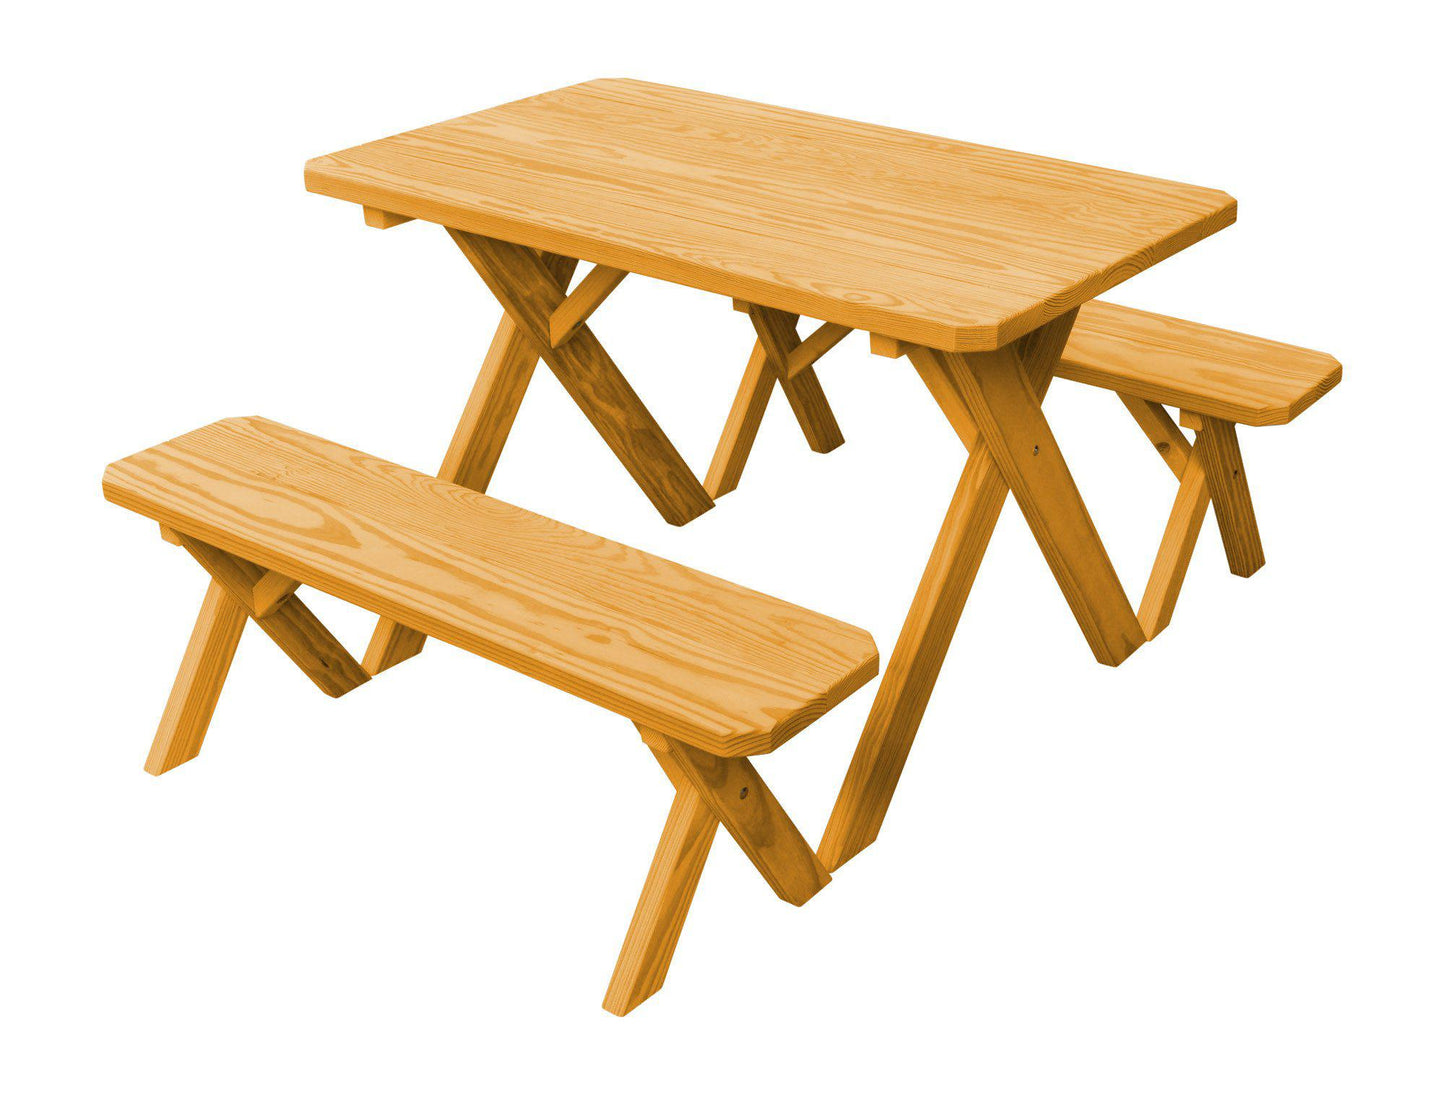 A&L Furniture Co. Pressure Treated Pine 4' Cross-leg Table w/2 Benches  - LEAD TIME TO SHIP 10 BUSINESS DAYS